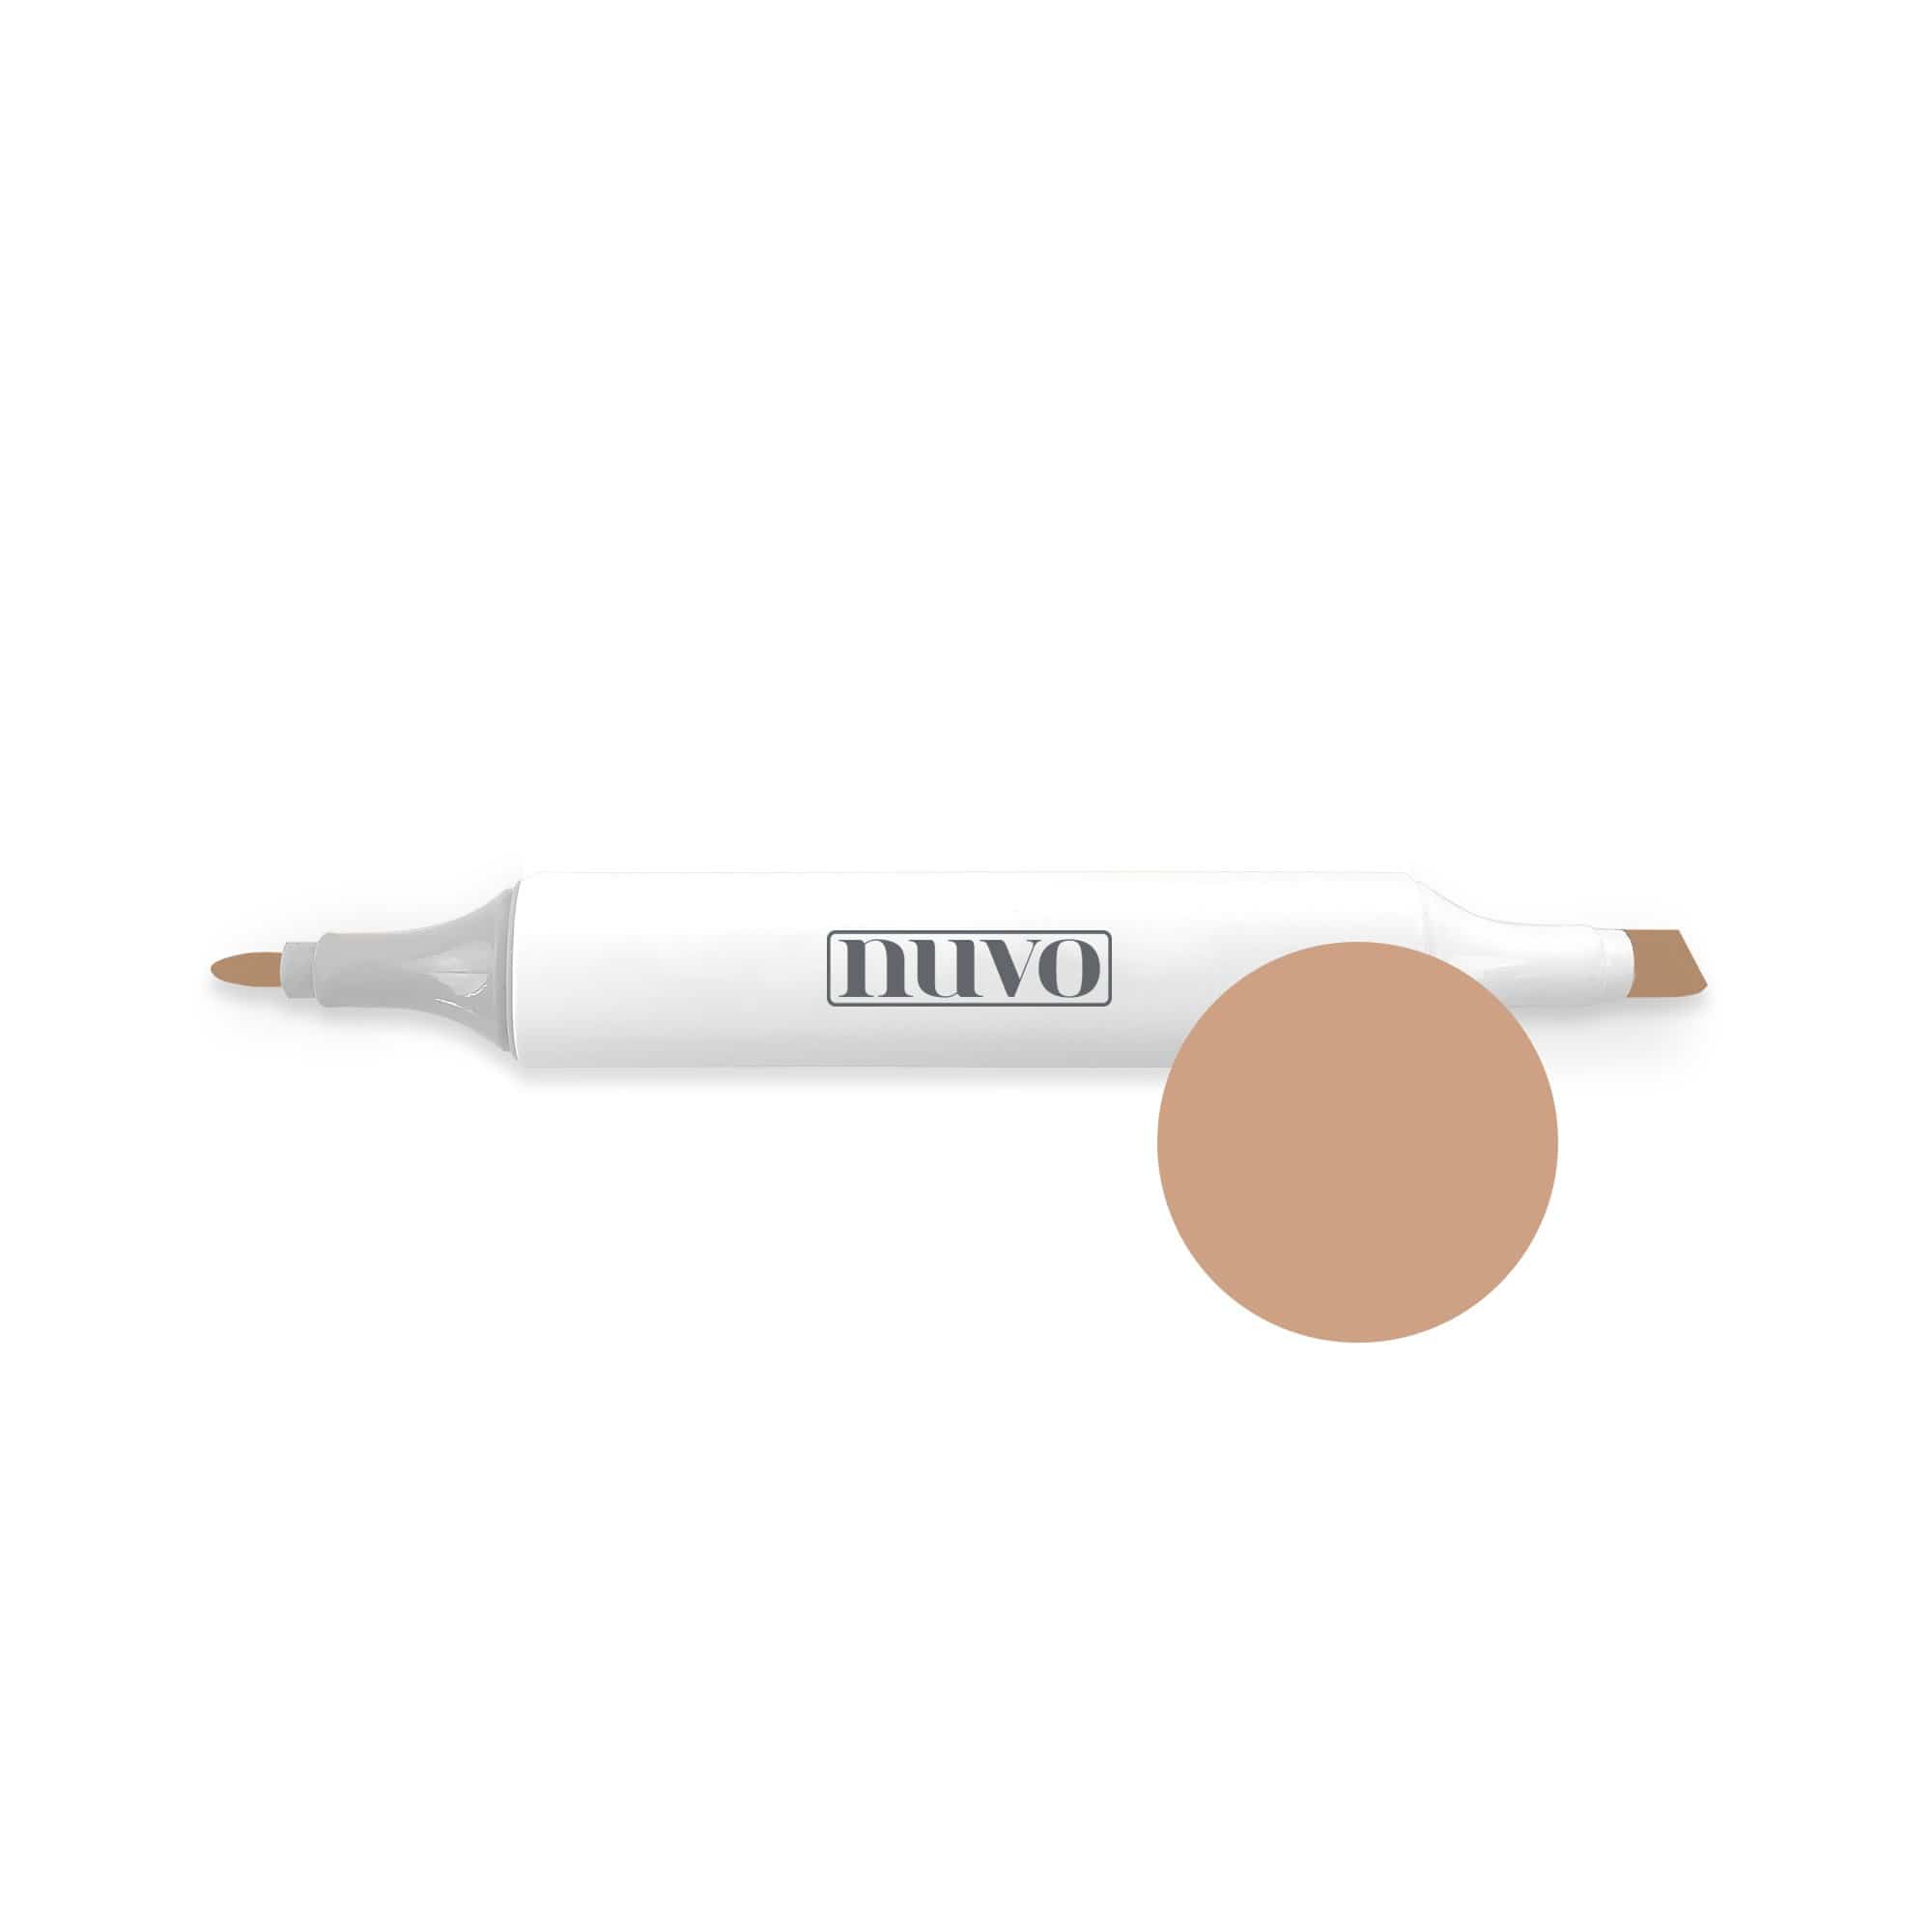 Natural Browns Alcohol Marker Pen Collection, 3 pack - Nuvo